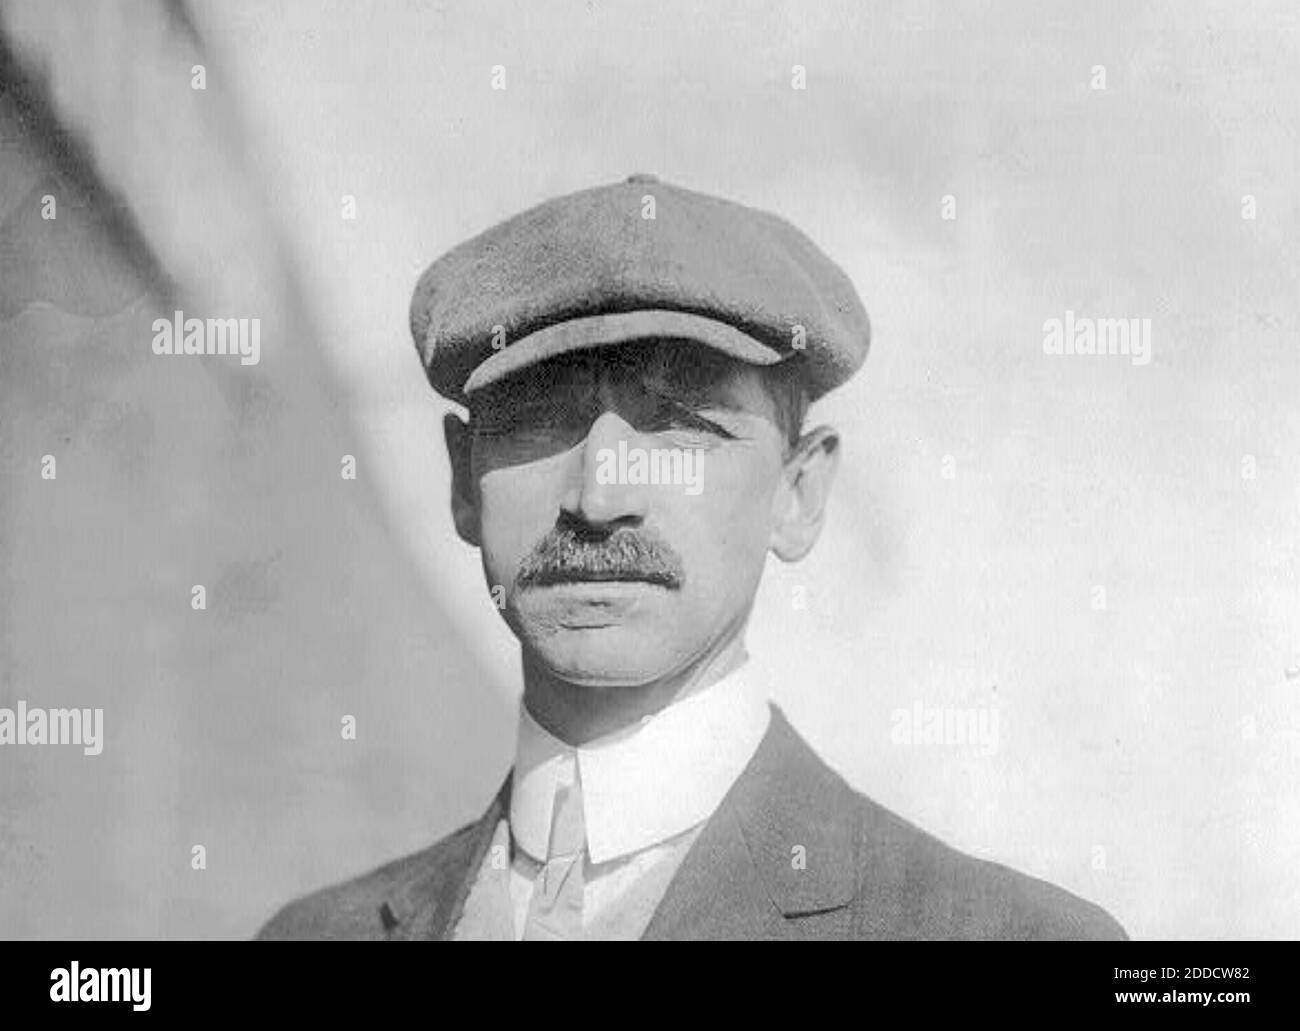 GLENN CURTIS (1878-1930) American aviation and motorcyle pioneer about 1909. Photo: Bain News Service Stock Photo